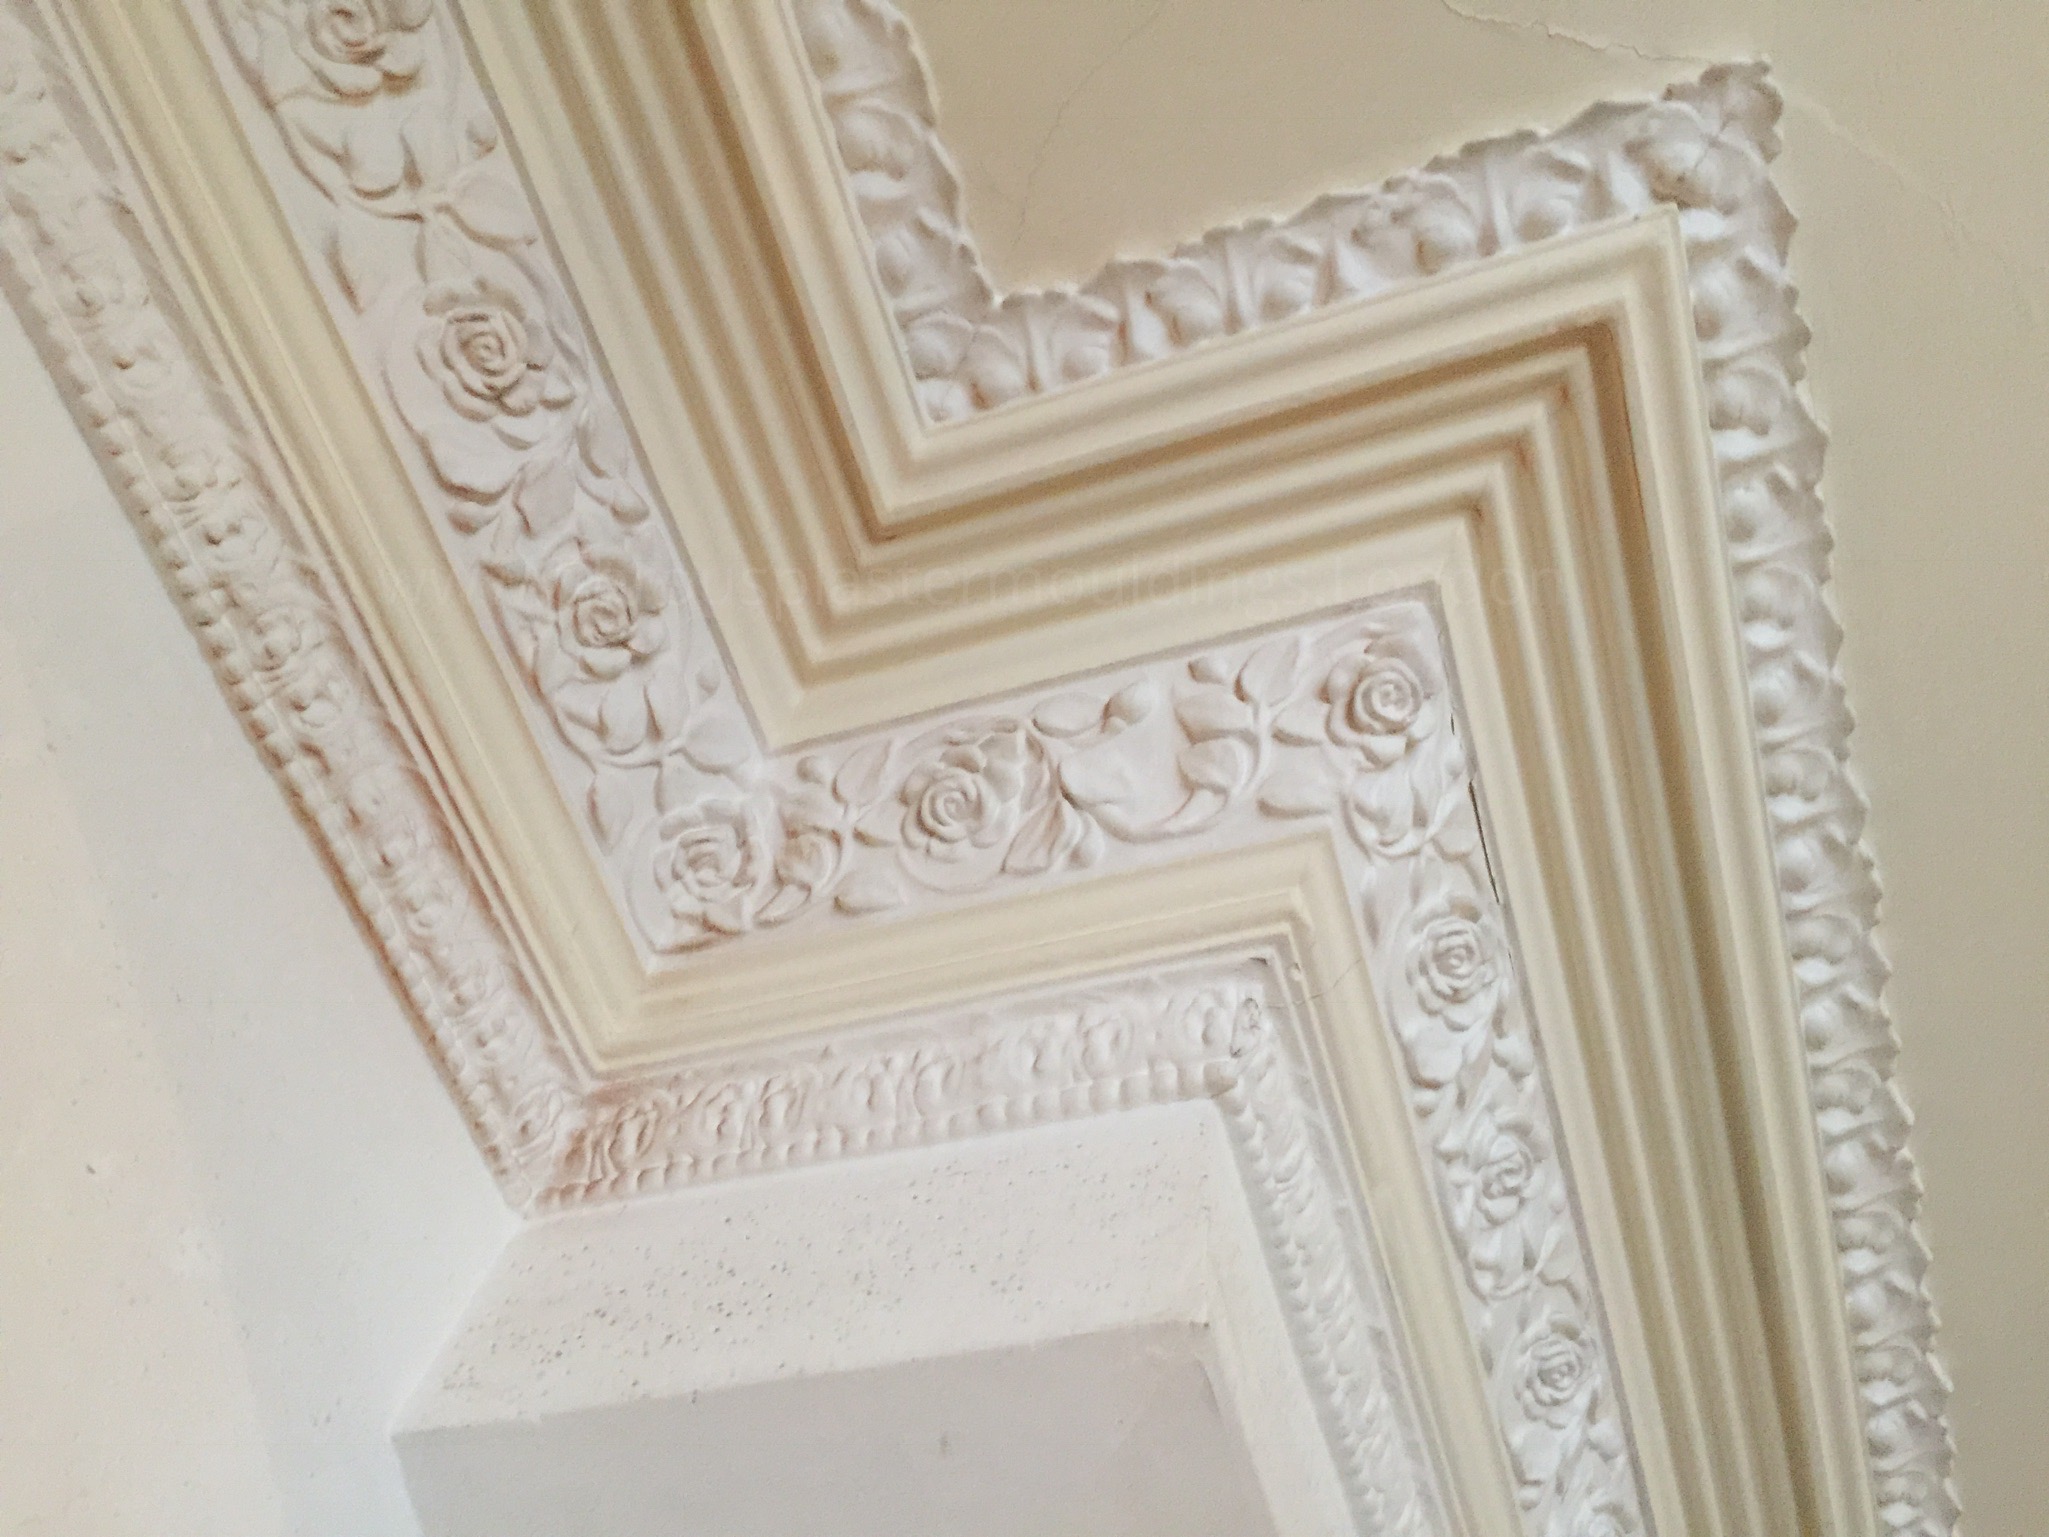 Cornice repairs in London by professionals